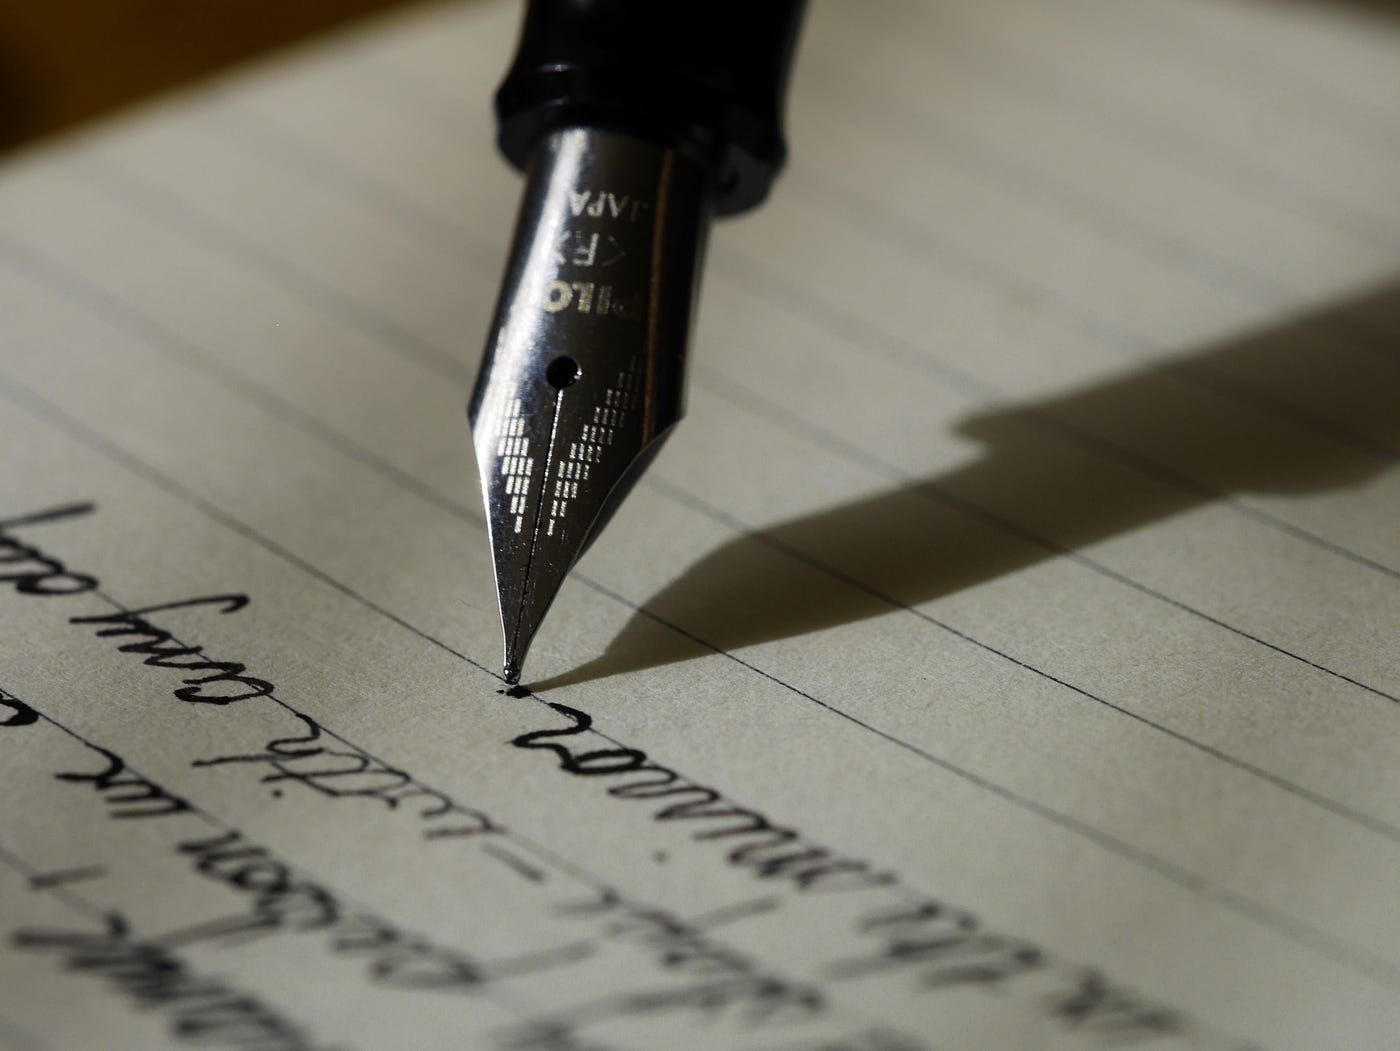 Why creative writing is better with a pen, Creative writing